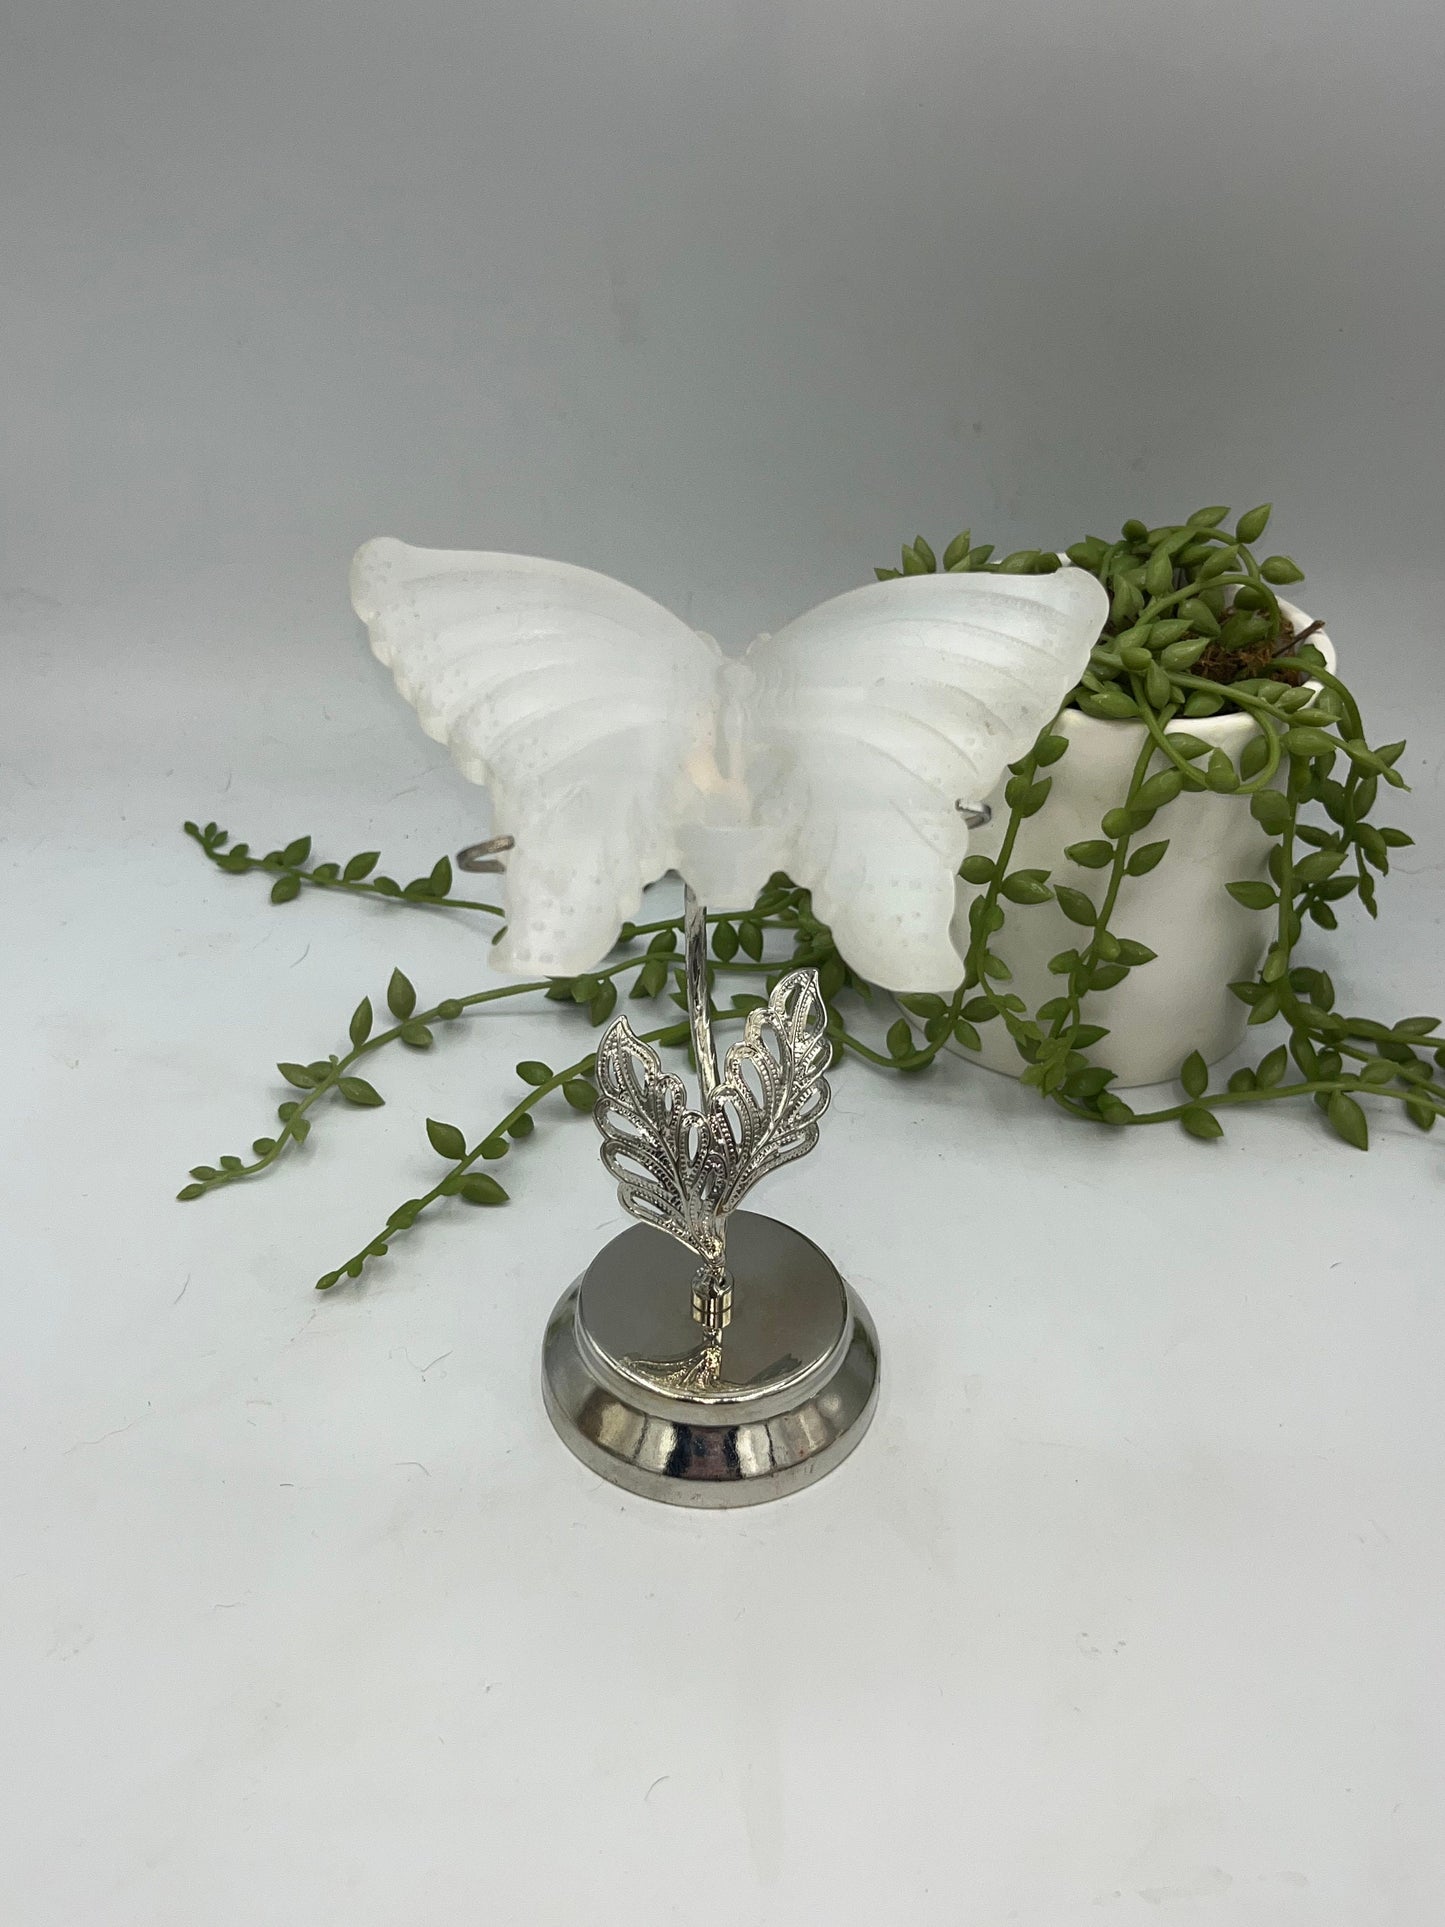 Selenite carved butterfly on stand, satin spar, gypsum, butterfly carved crystal, stand included